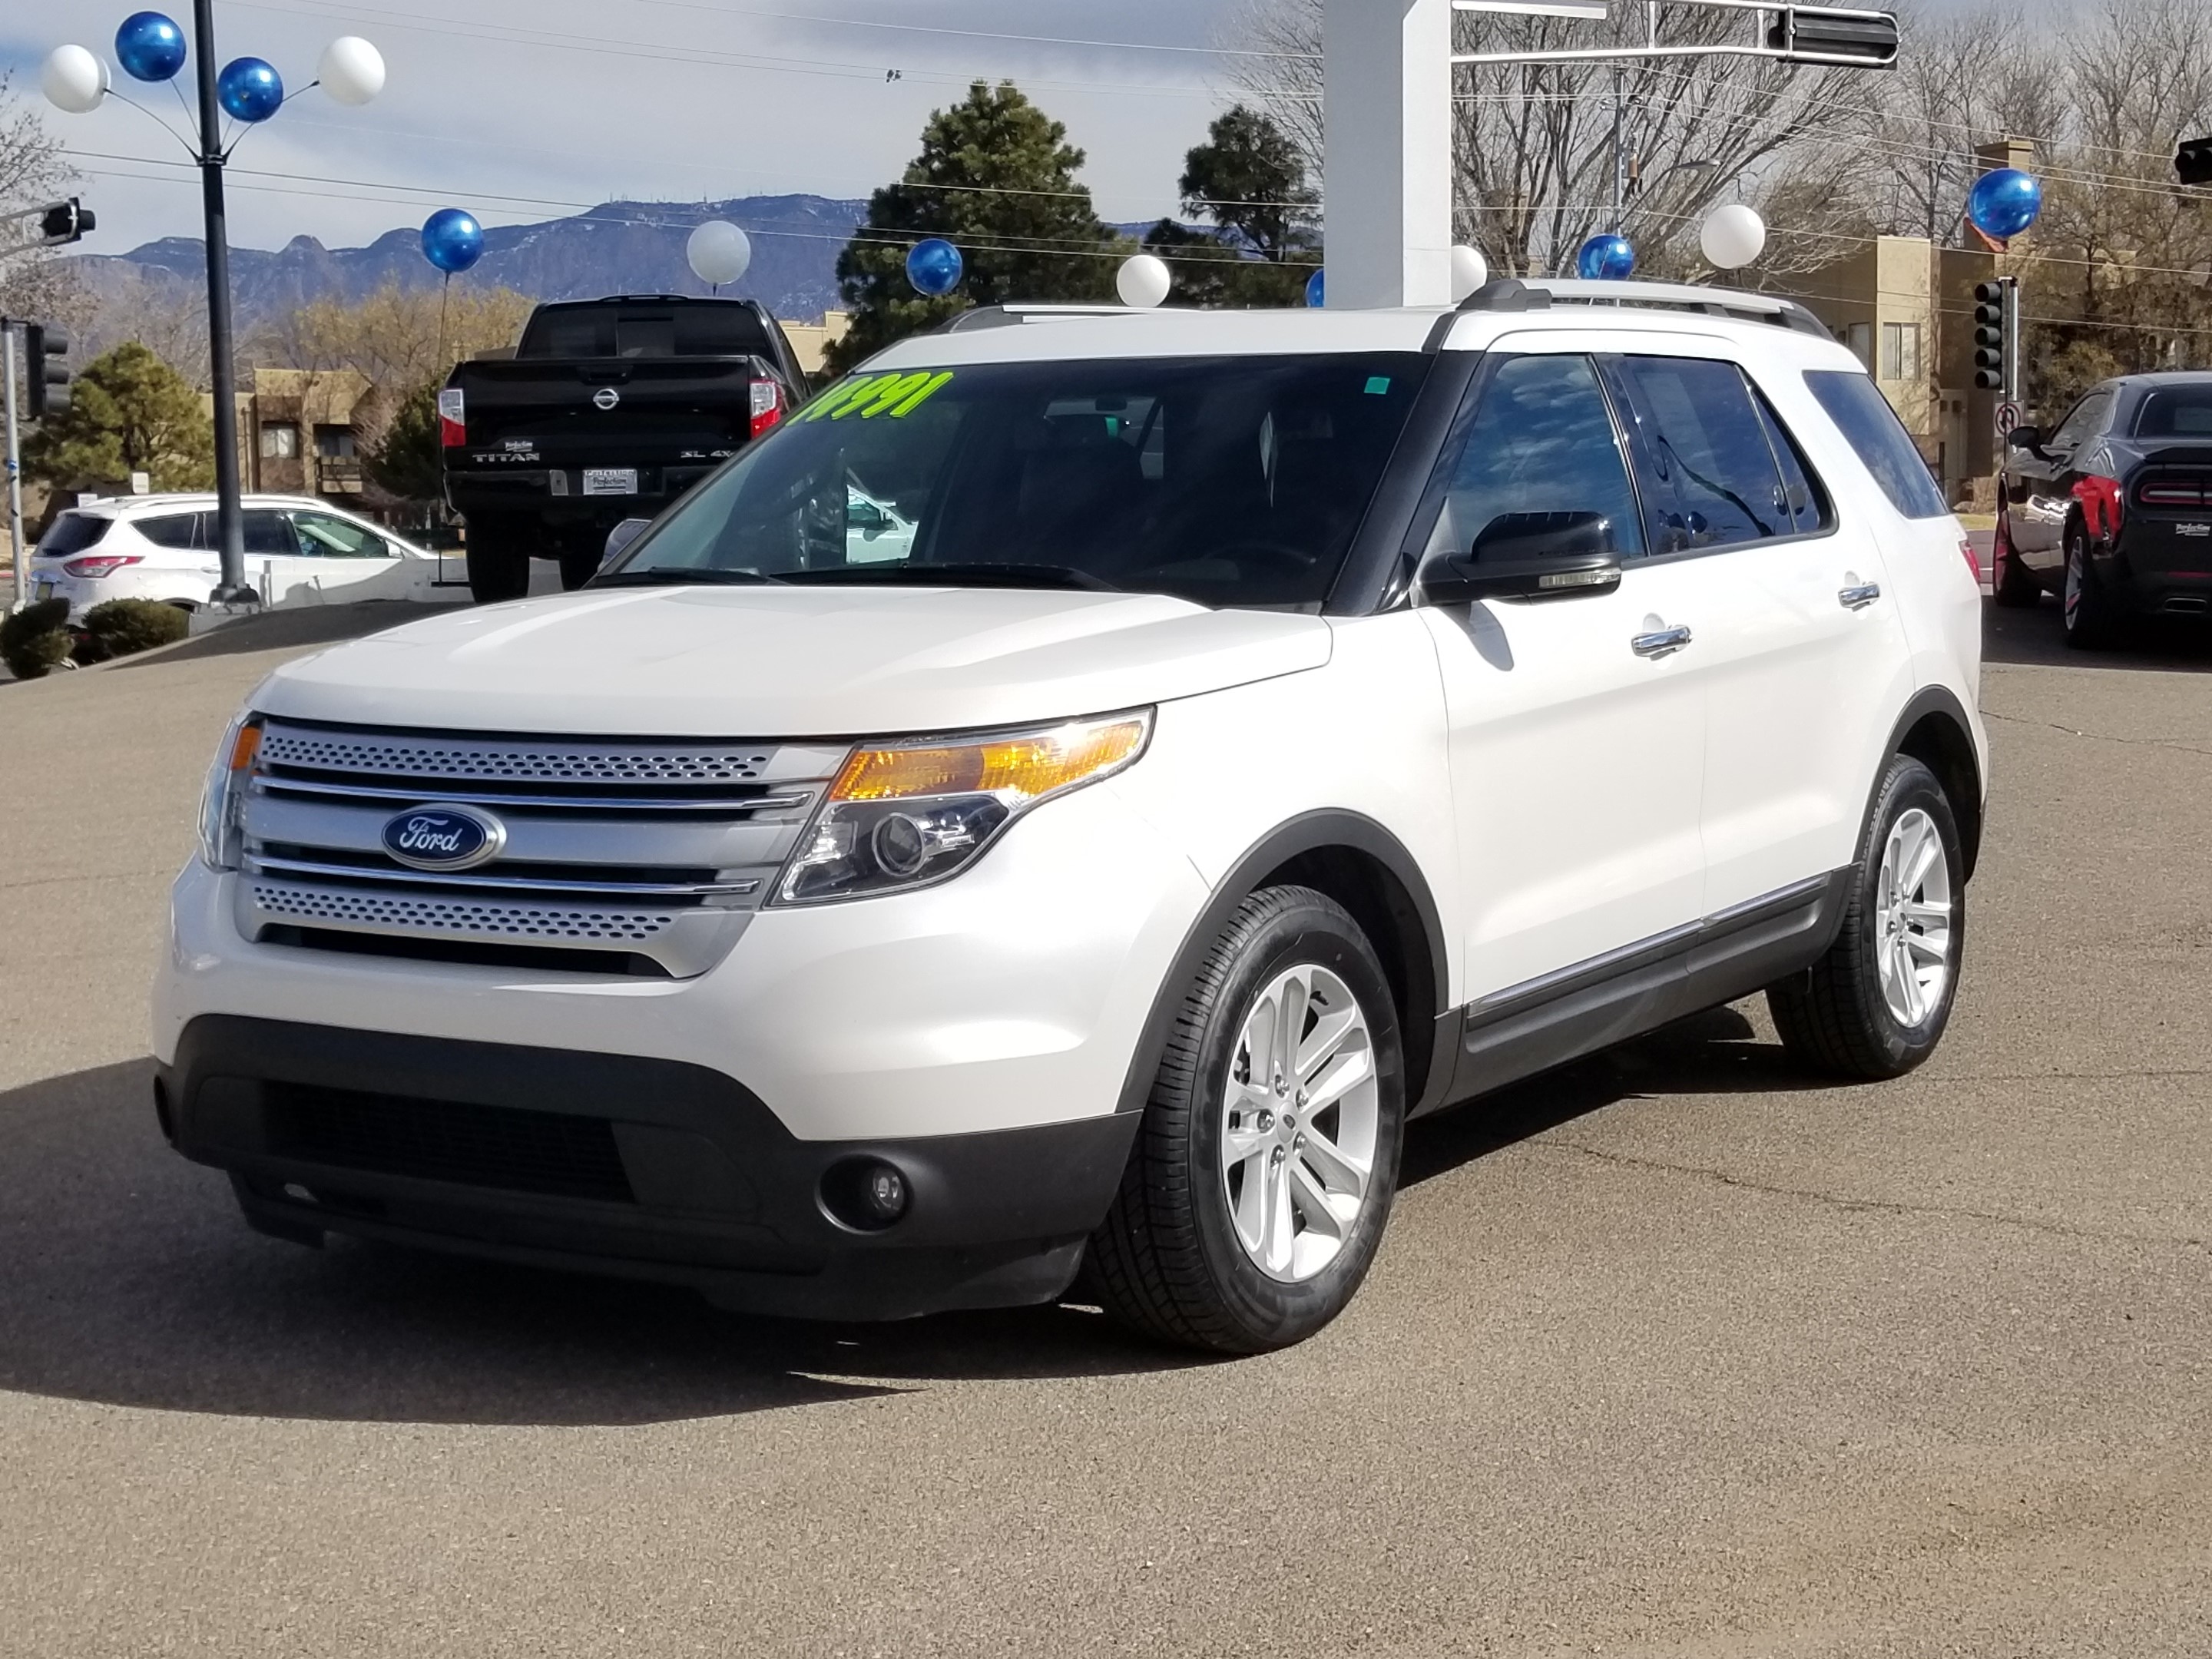 Pre-Owned 2012 Ford Explorer XLT Sport Utility in Albuquerque #AP0840